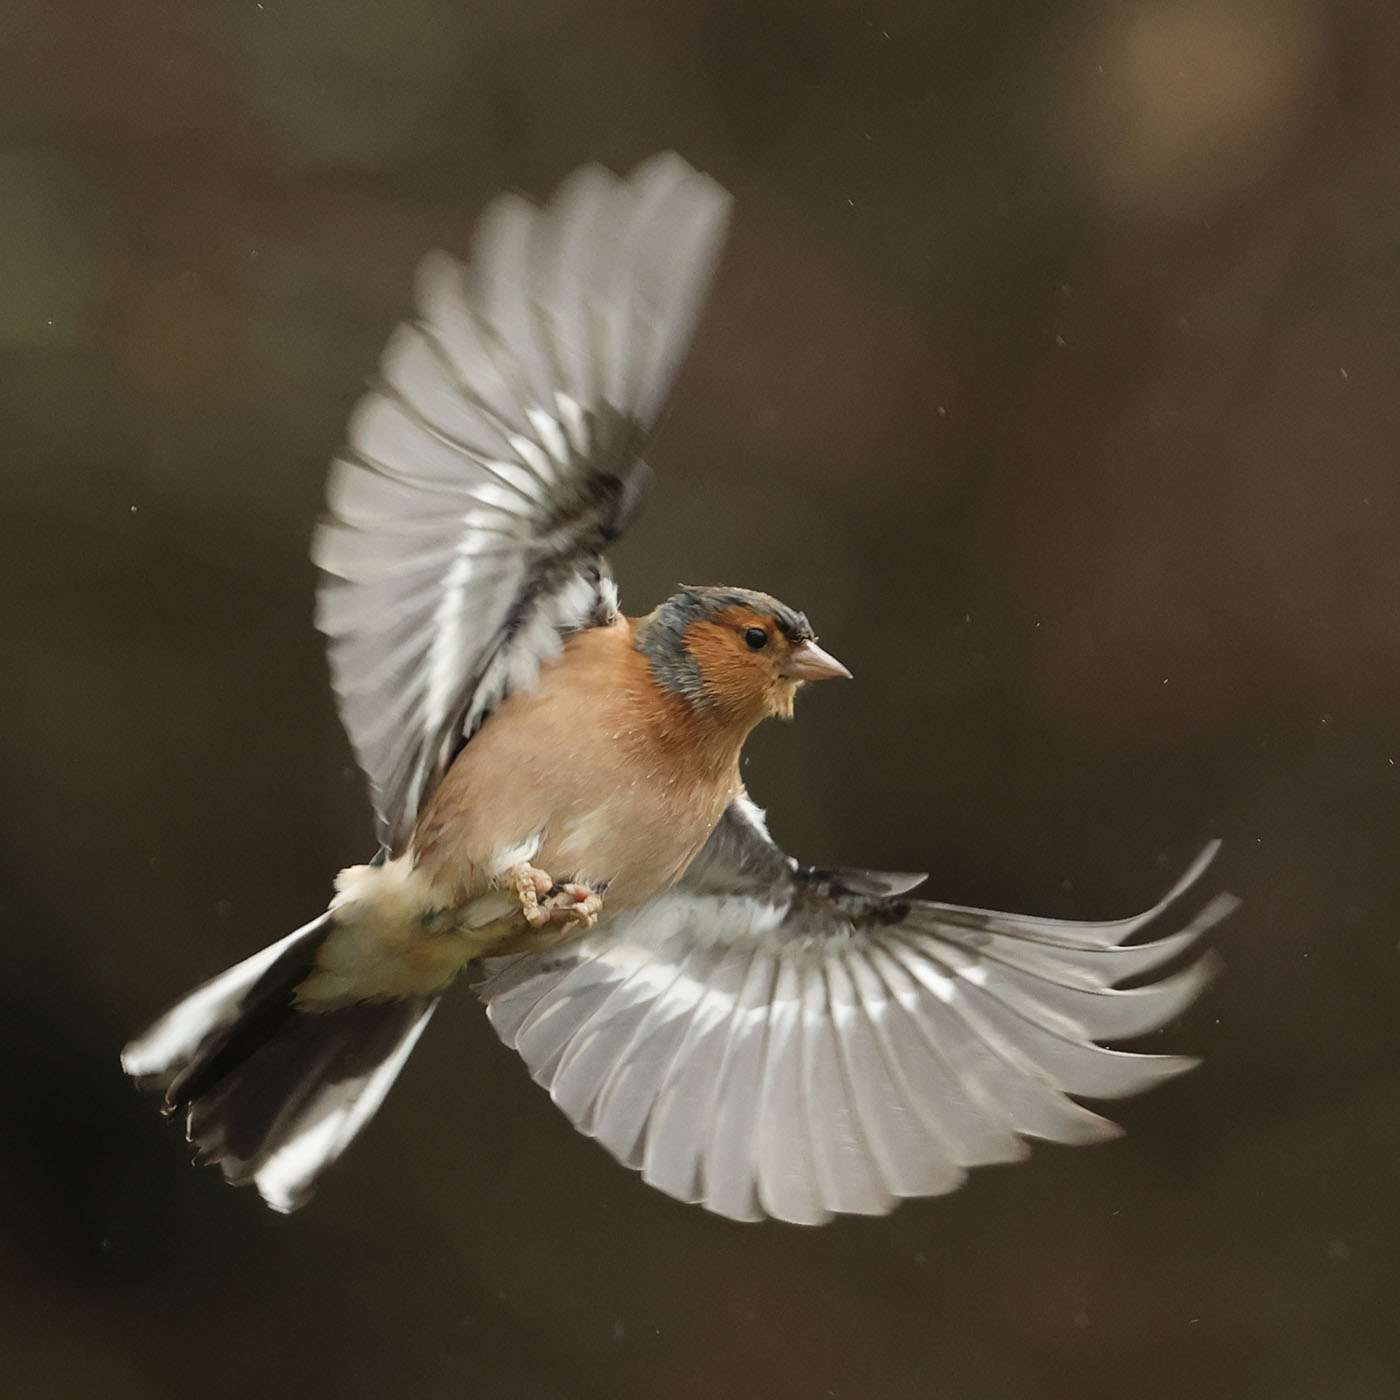 Chaffinch by Steve Hopper at South Brent